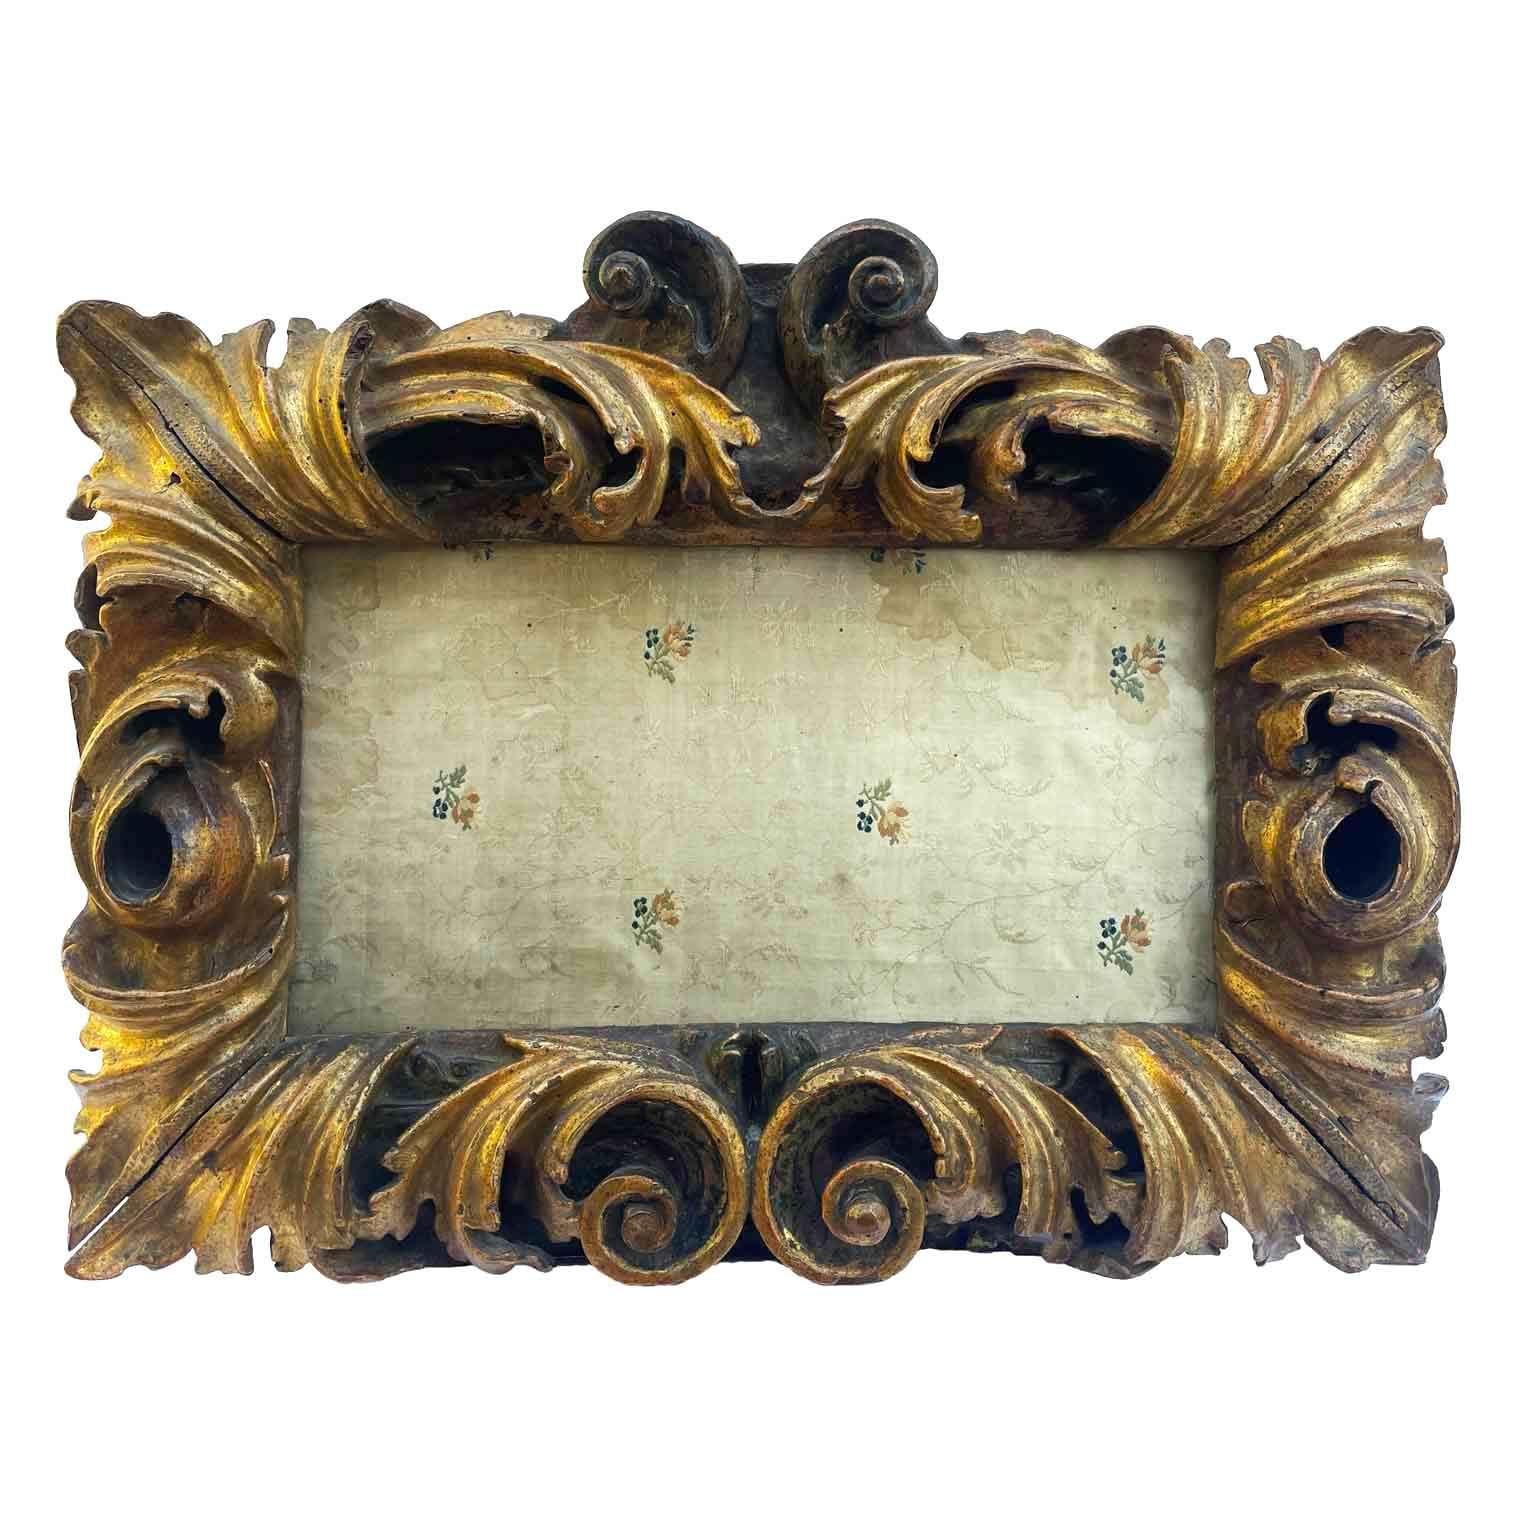 Italian Baroque Gilded Cartouche Sculpted Frame Early 1600s For Sale 4